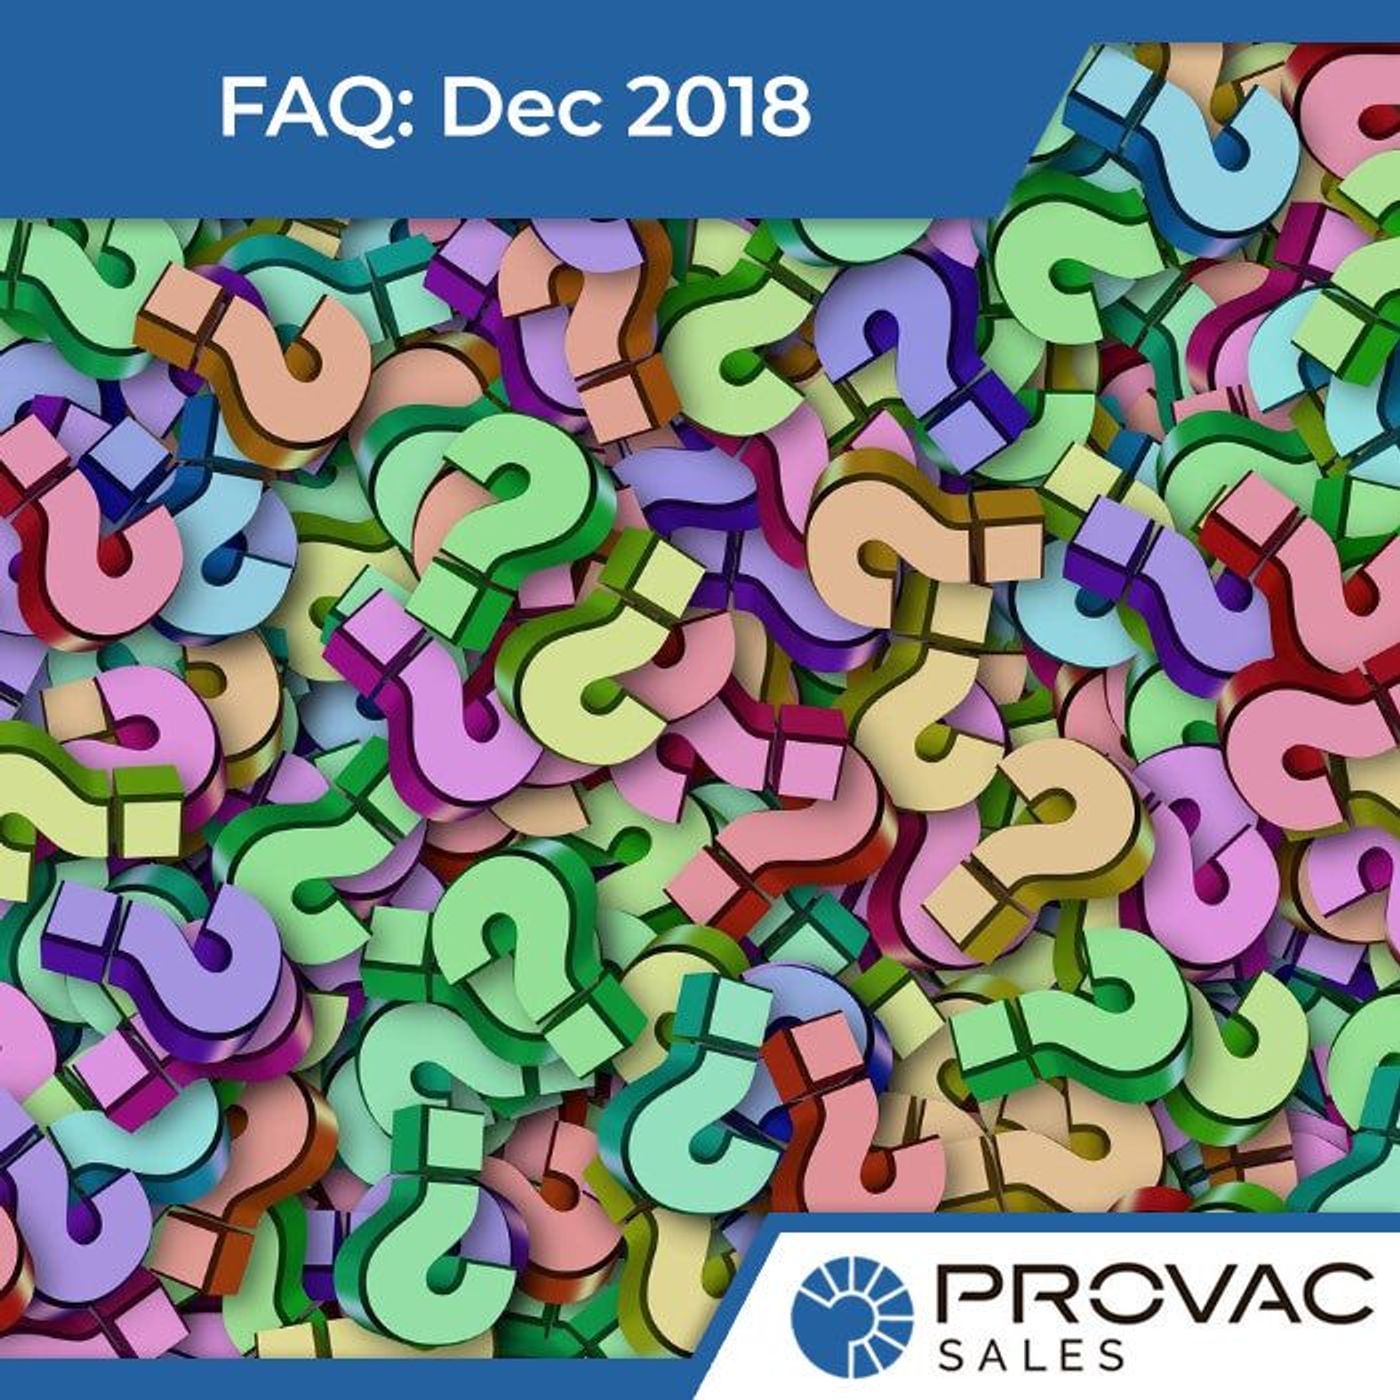 Frequently Asked Questions: Dec 2018 Edition